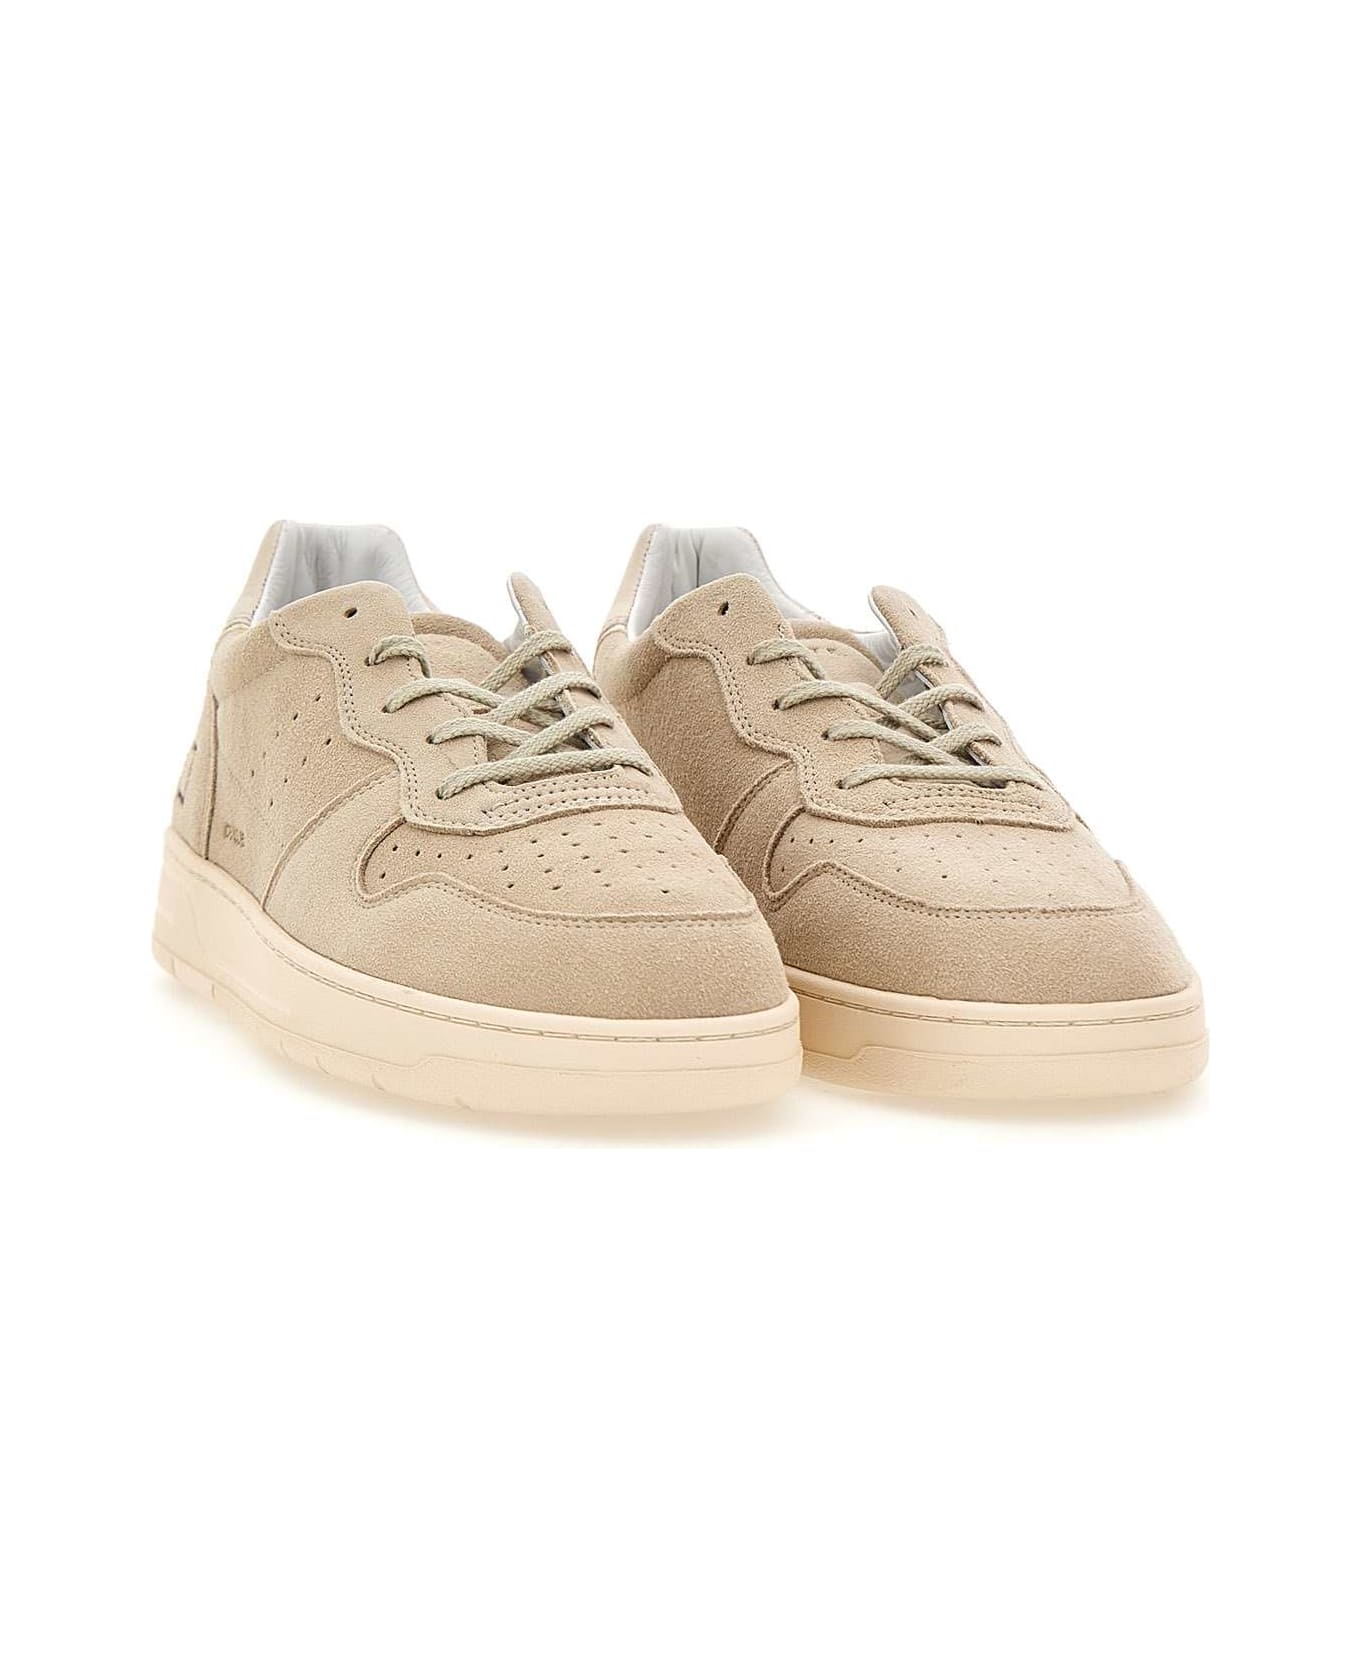 D.A.T.E. "court 2.0 Colored" Suede Sneakers - BEIGE